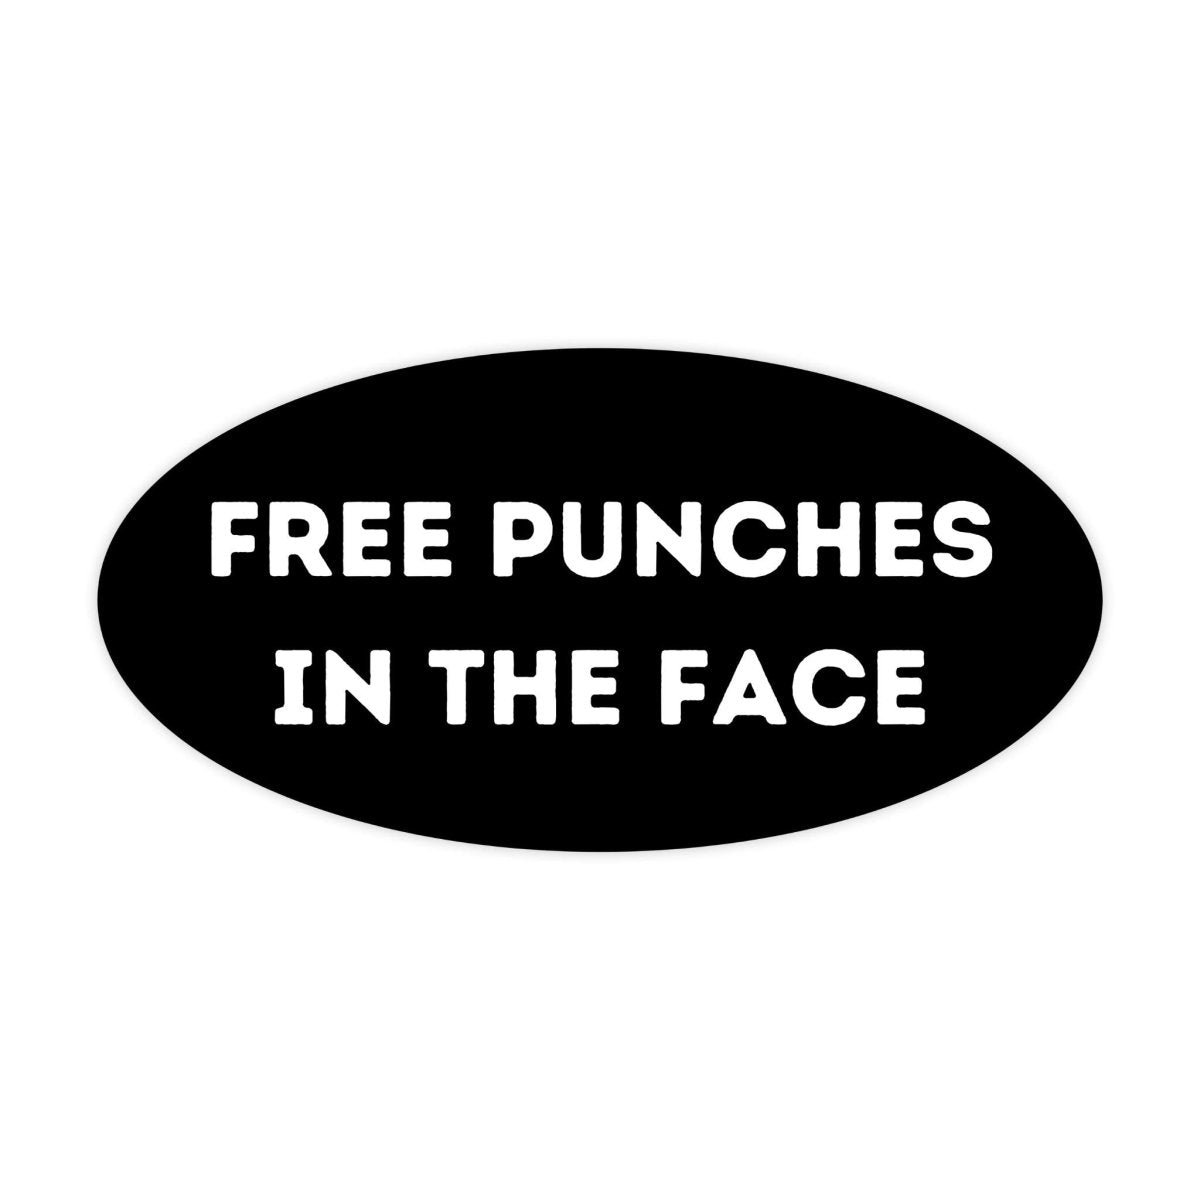 Free Punches In The Face Sticker - stickerbullFree Punches In The Face StickerRetail StickerstickerbullstickerbullSage_Free Punches [#18]Free Punches In The Face Sticker